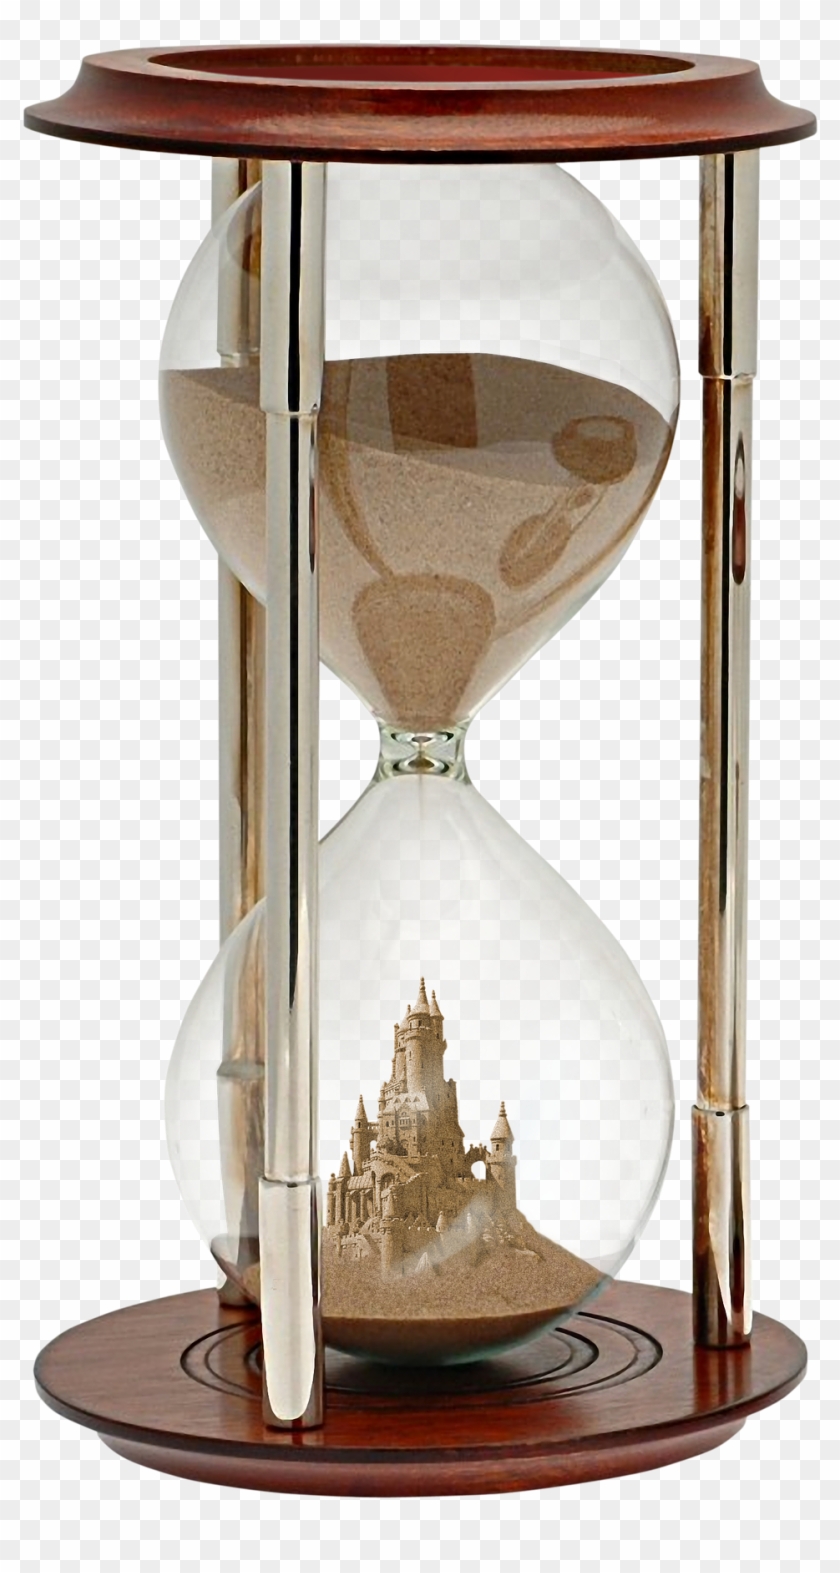 Hourglass Sand Castle Sand Time Png Image - Reloj De Arena Png Clipart #2817275